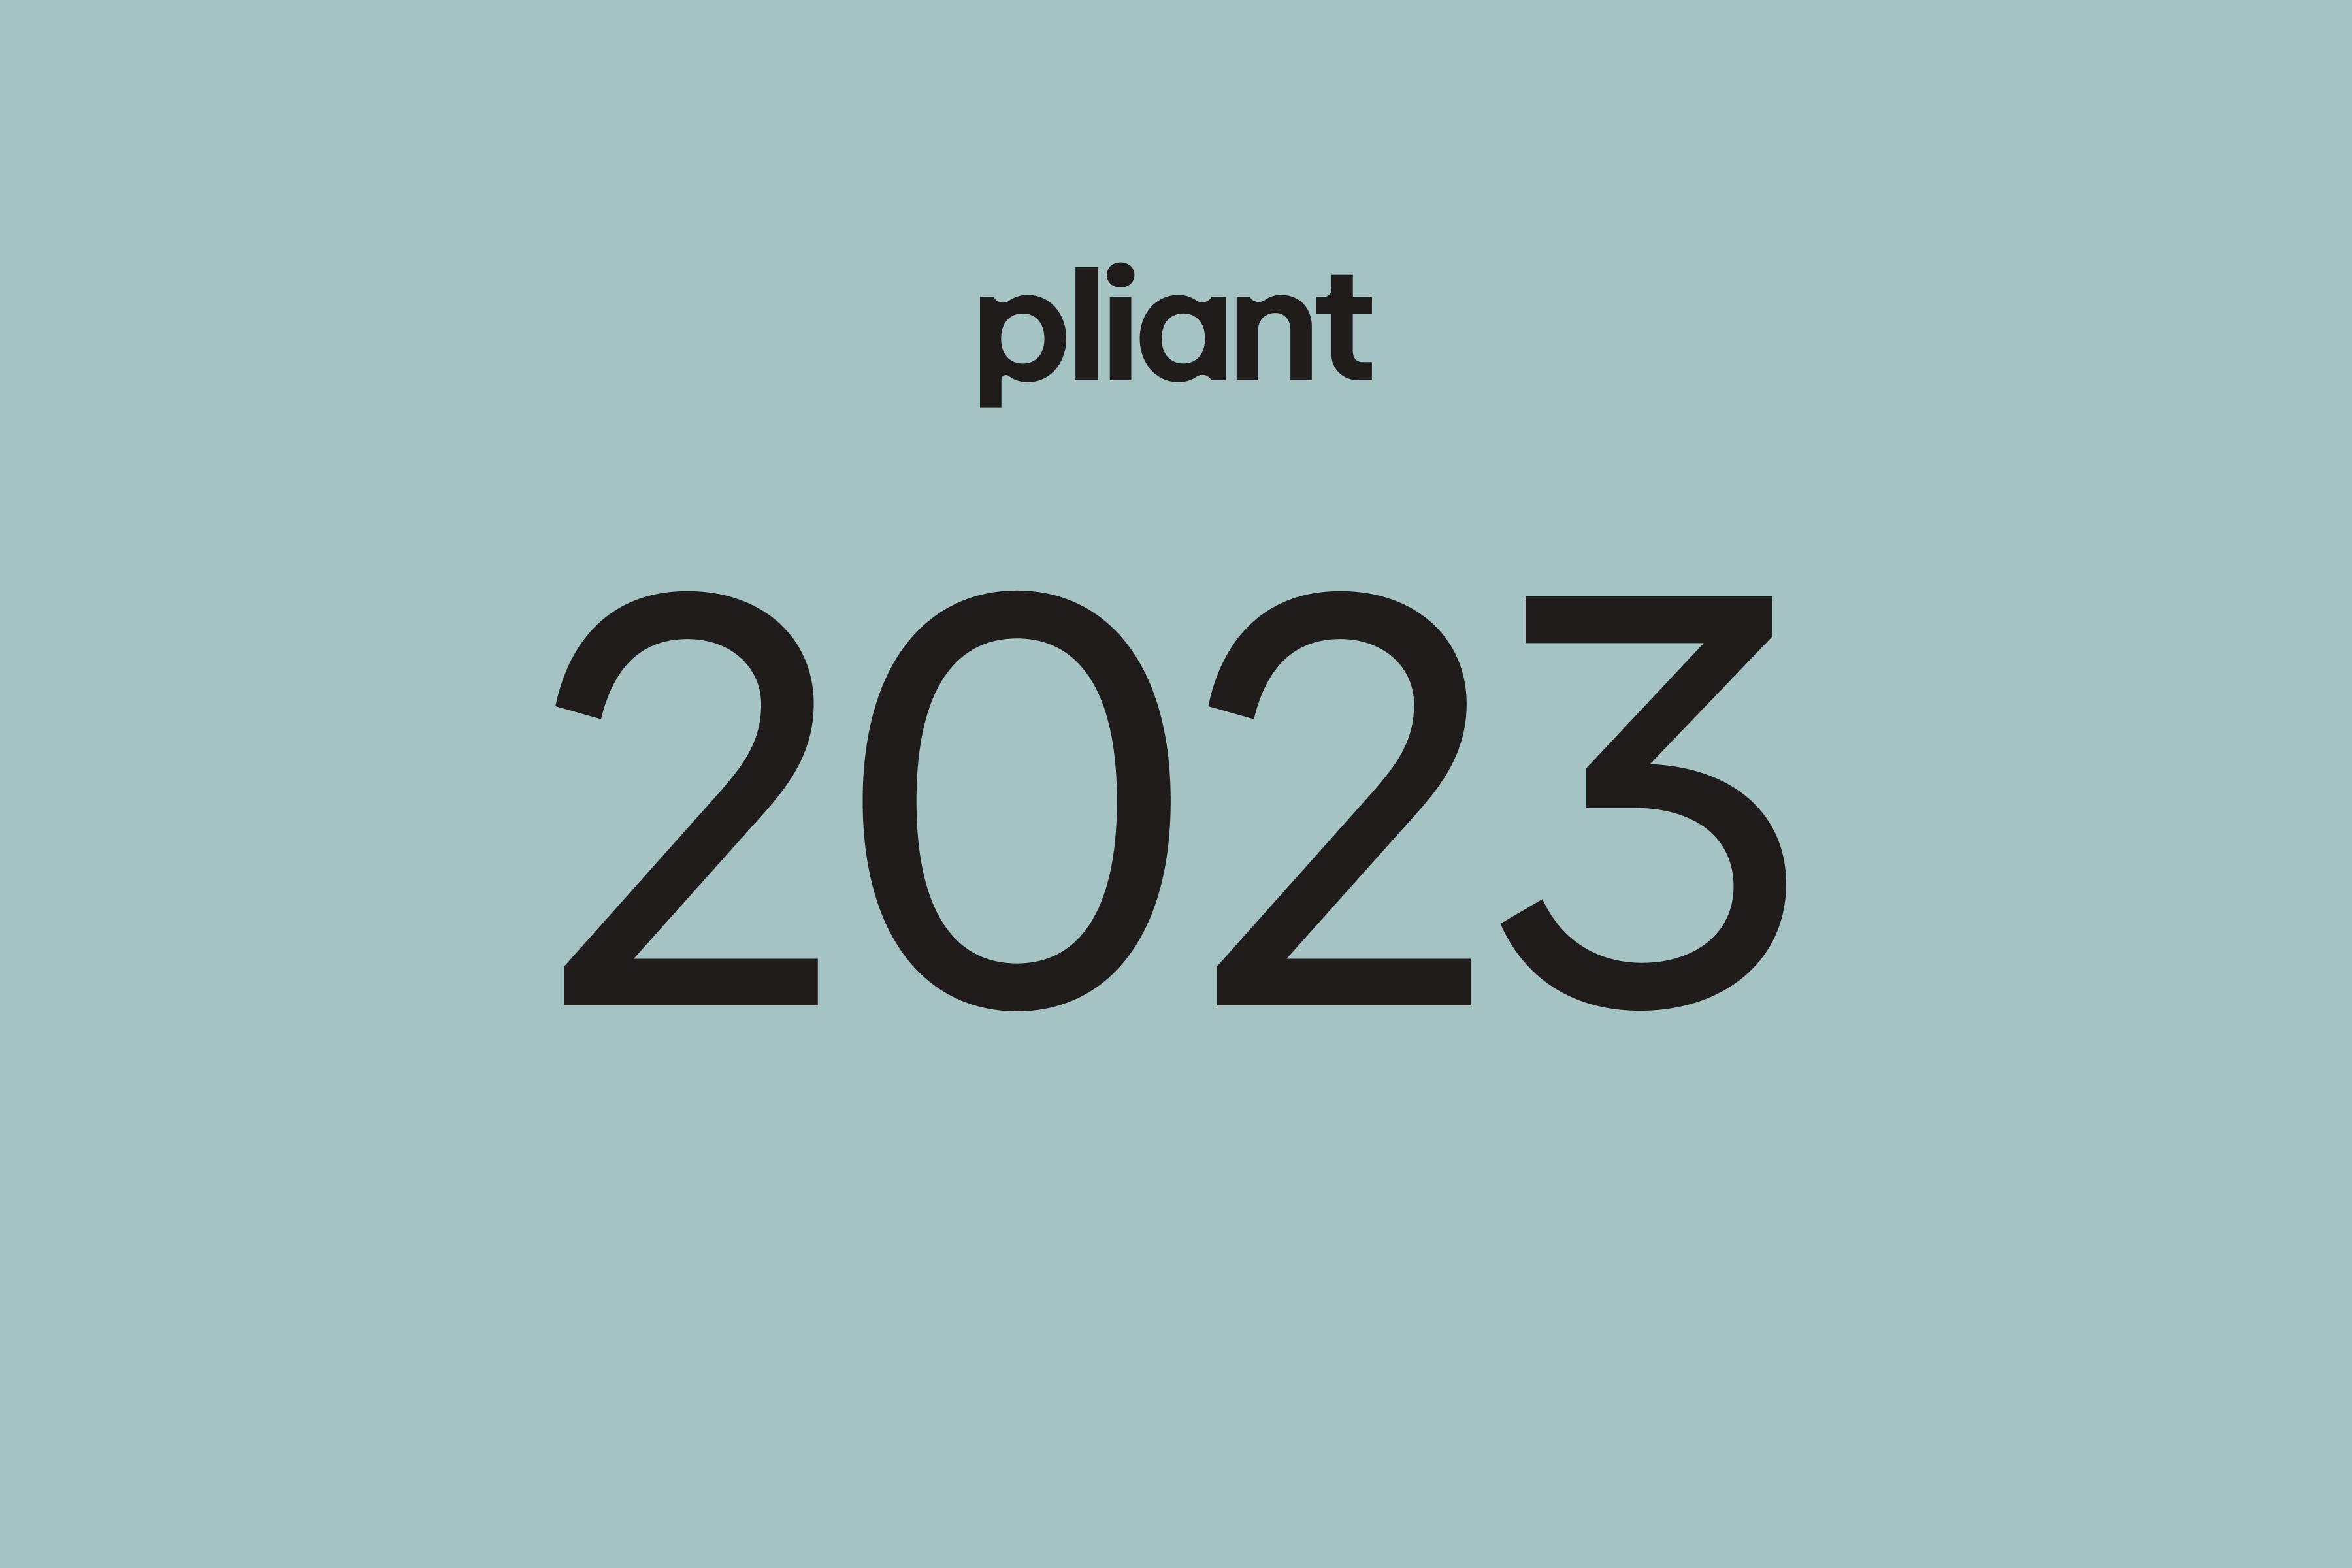 end-of-2023